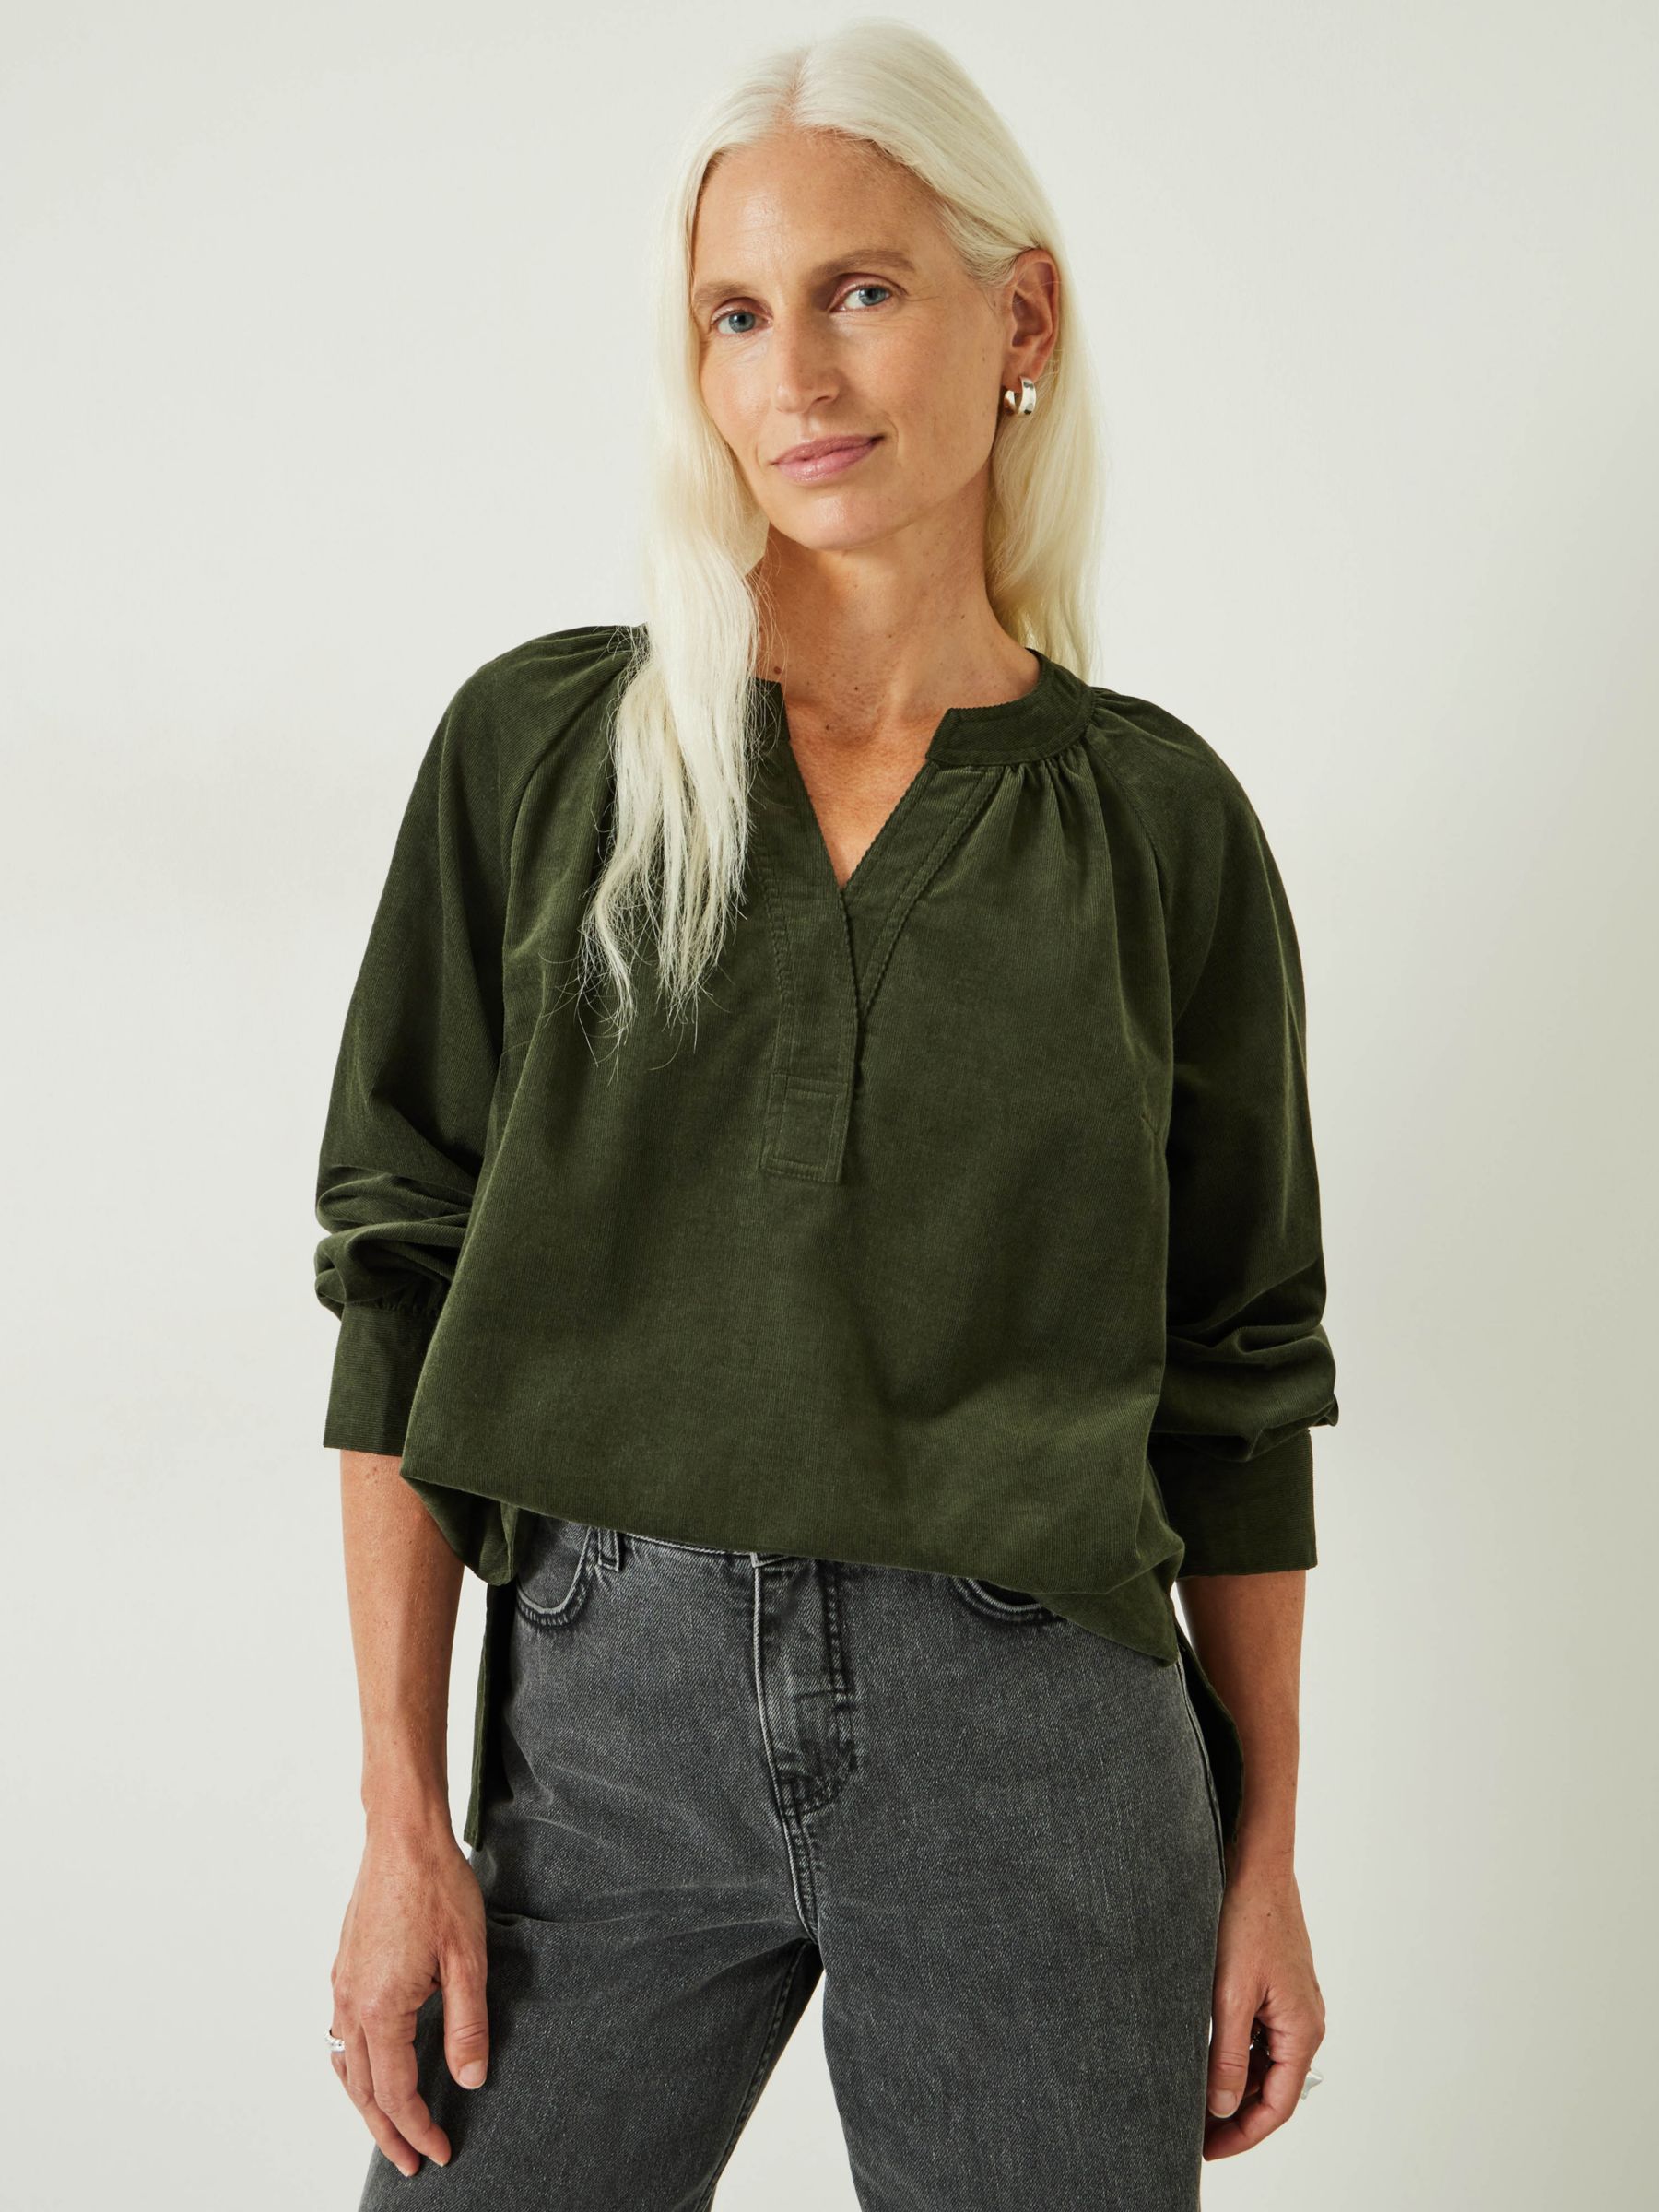 HUSH Cayla Cord Top, Forest Green at John Lewis & Partners